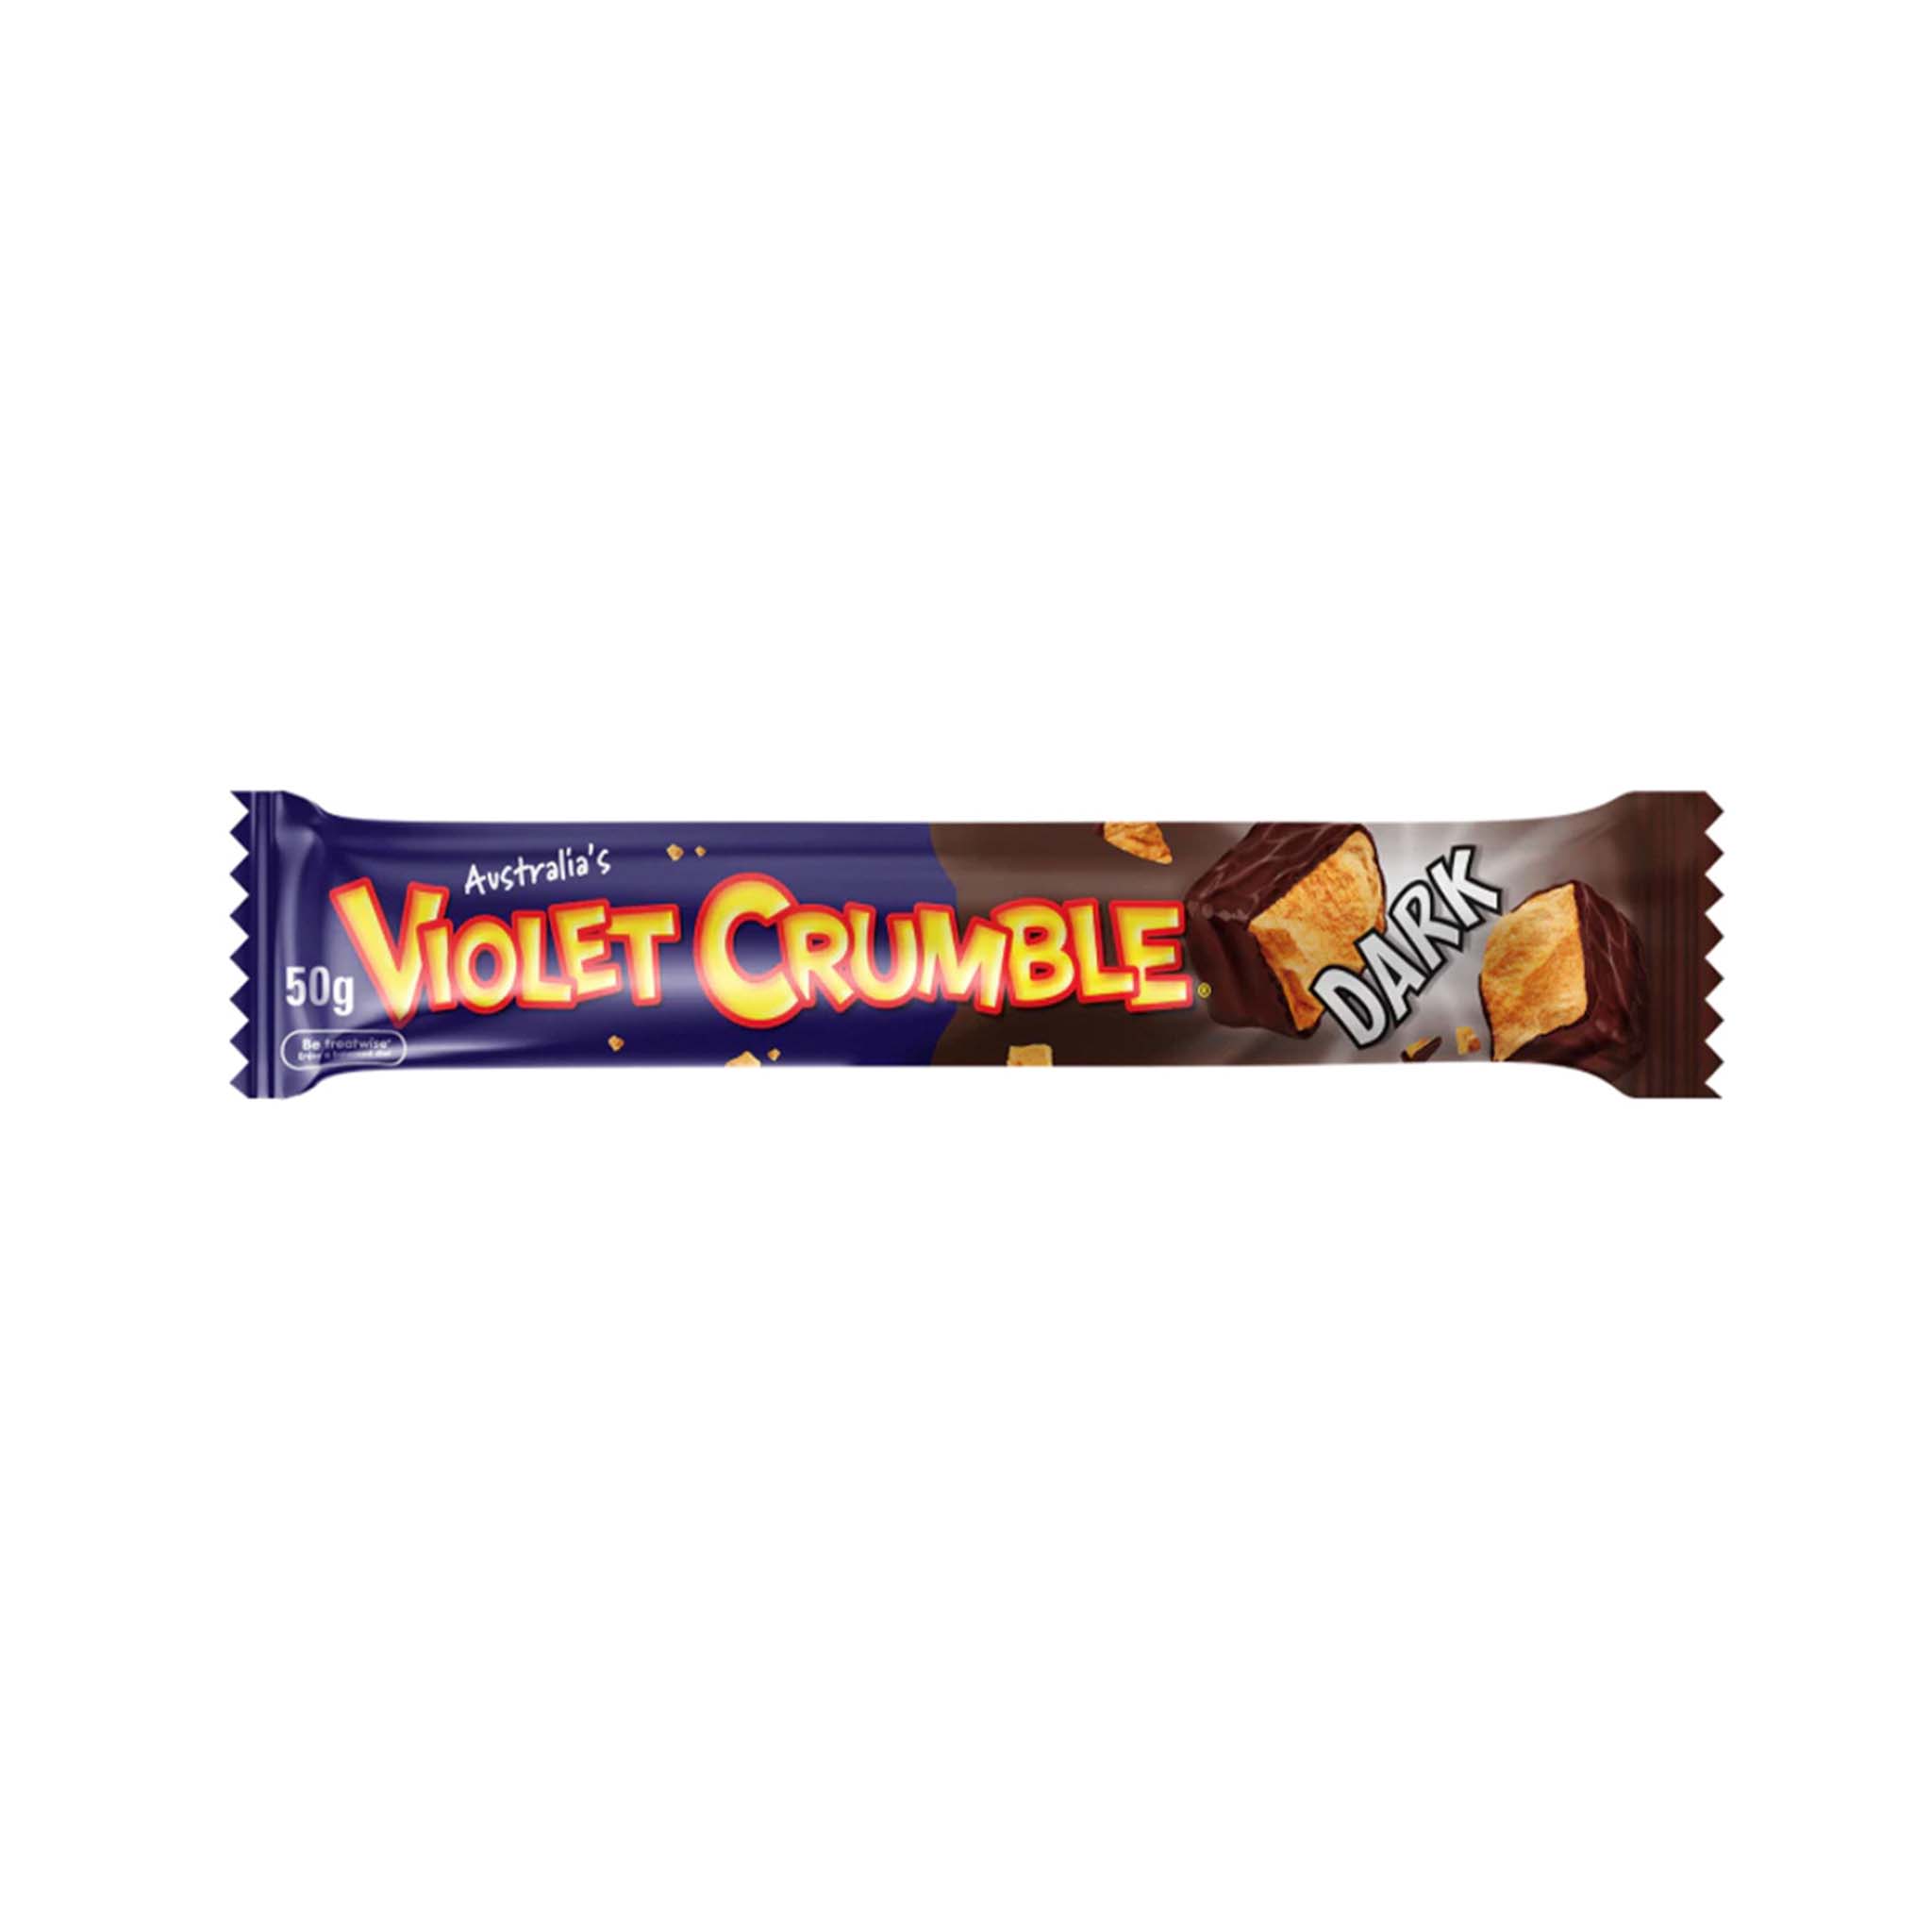 Violet Crumble is a bar of velvety chocolate, encasing a deliciously crumbly, honeycomb-toffee center.